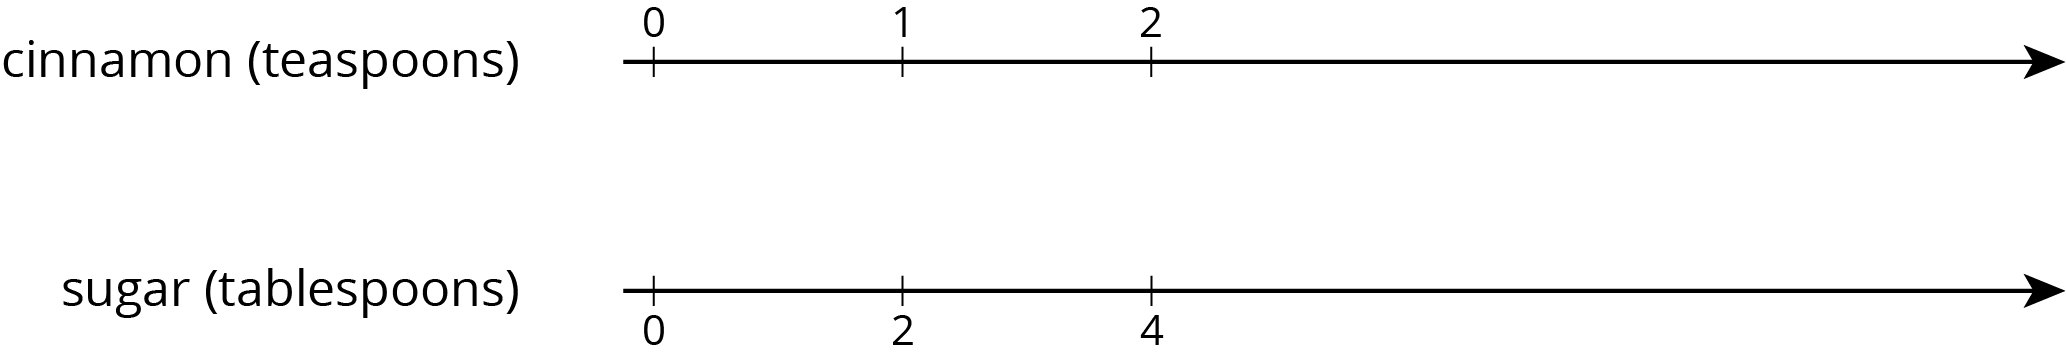 A double number line with 3 evenly spaced tick marks. The top number line is labeled “cinnamon in teaspoons” and starting with the first tick mark 0, 1, and 2 are labeled. The bottom number line is labeled “sugar in teaspoons” and starting with the first tick mark 0, 2, and 4 are labeled.